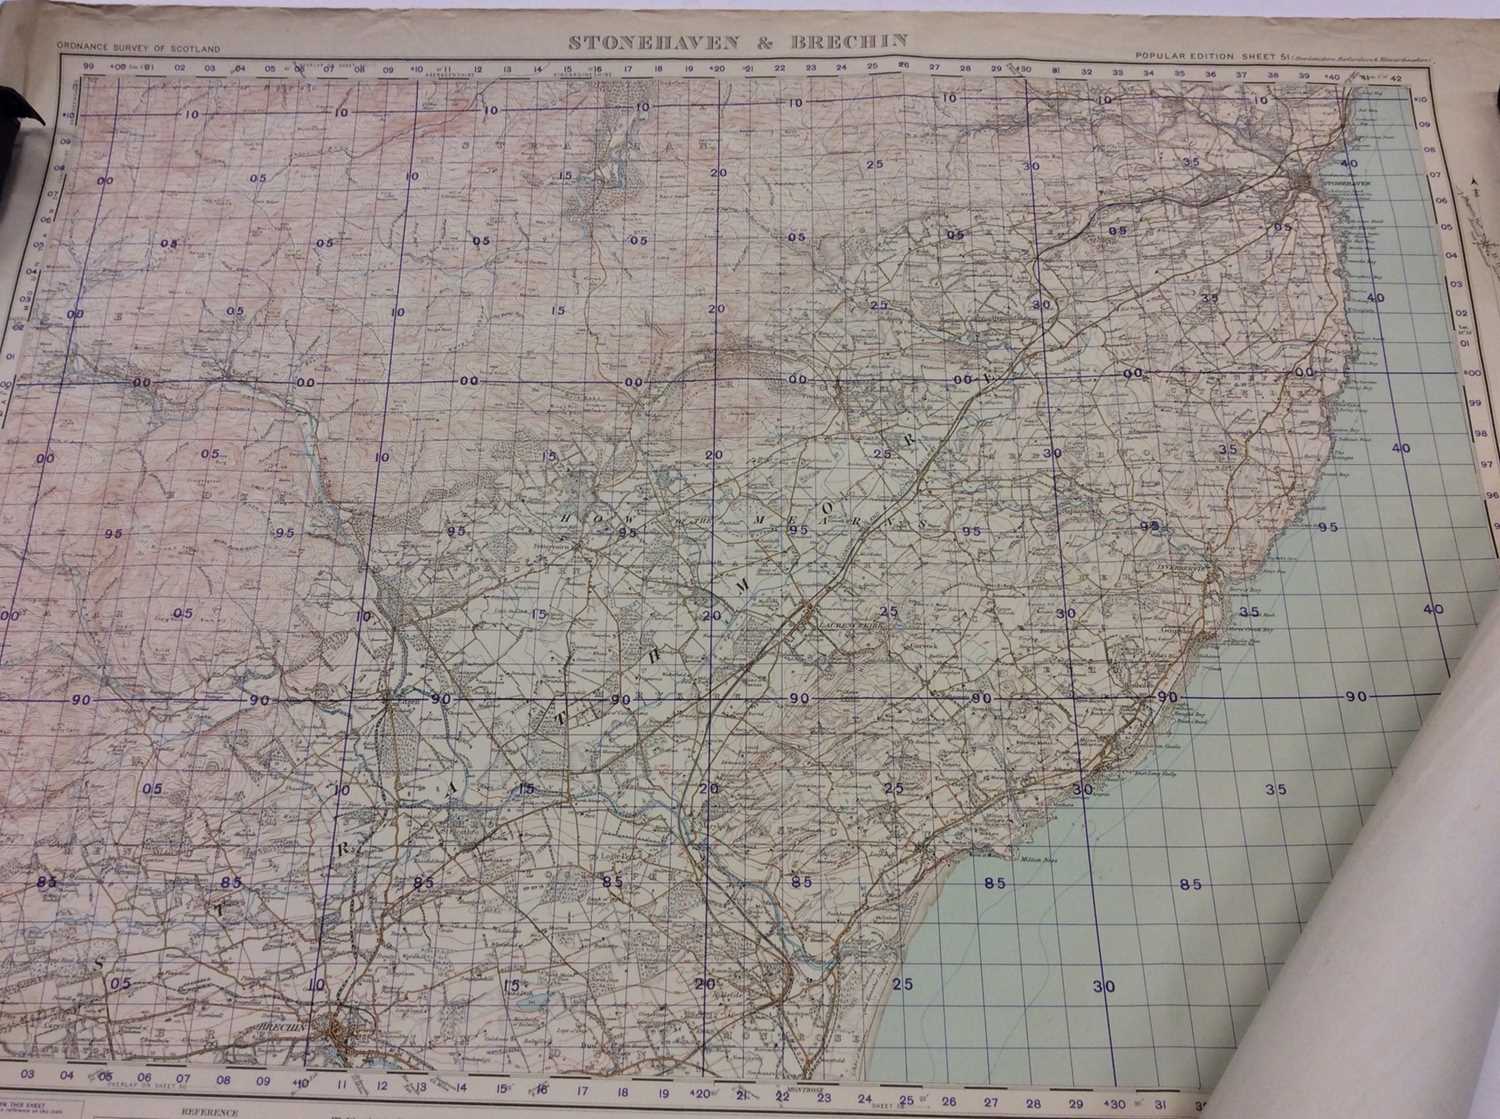 Lot 247 - Group of Second World War period maps of Great Britain to include Chichester & Worthing, Barmouth & Aberystwyth, Stranraer, Brighton & Eastbourne, Orkney Islands (South), The Cheviot Hills, Llandud...